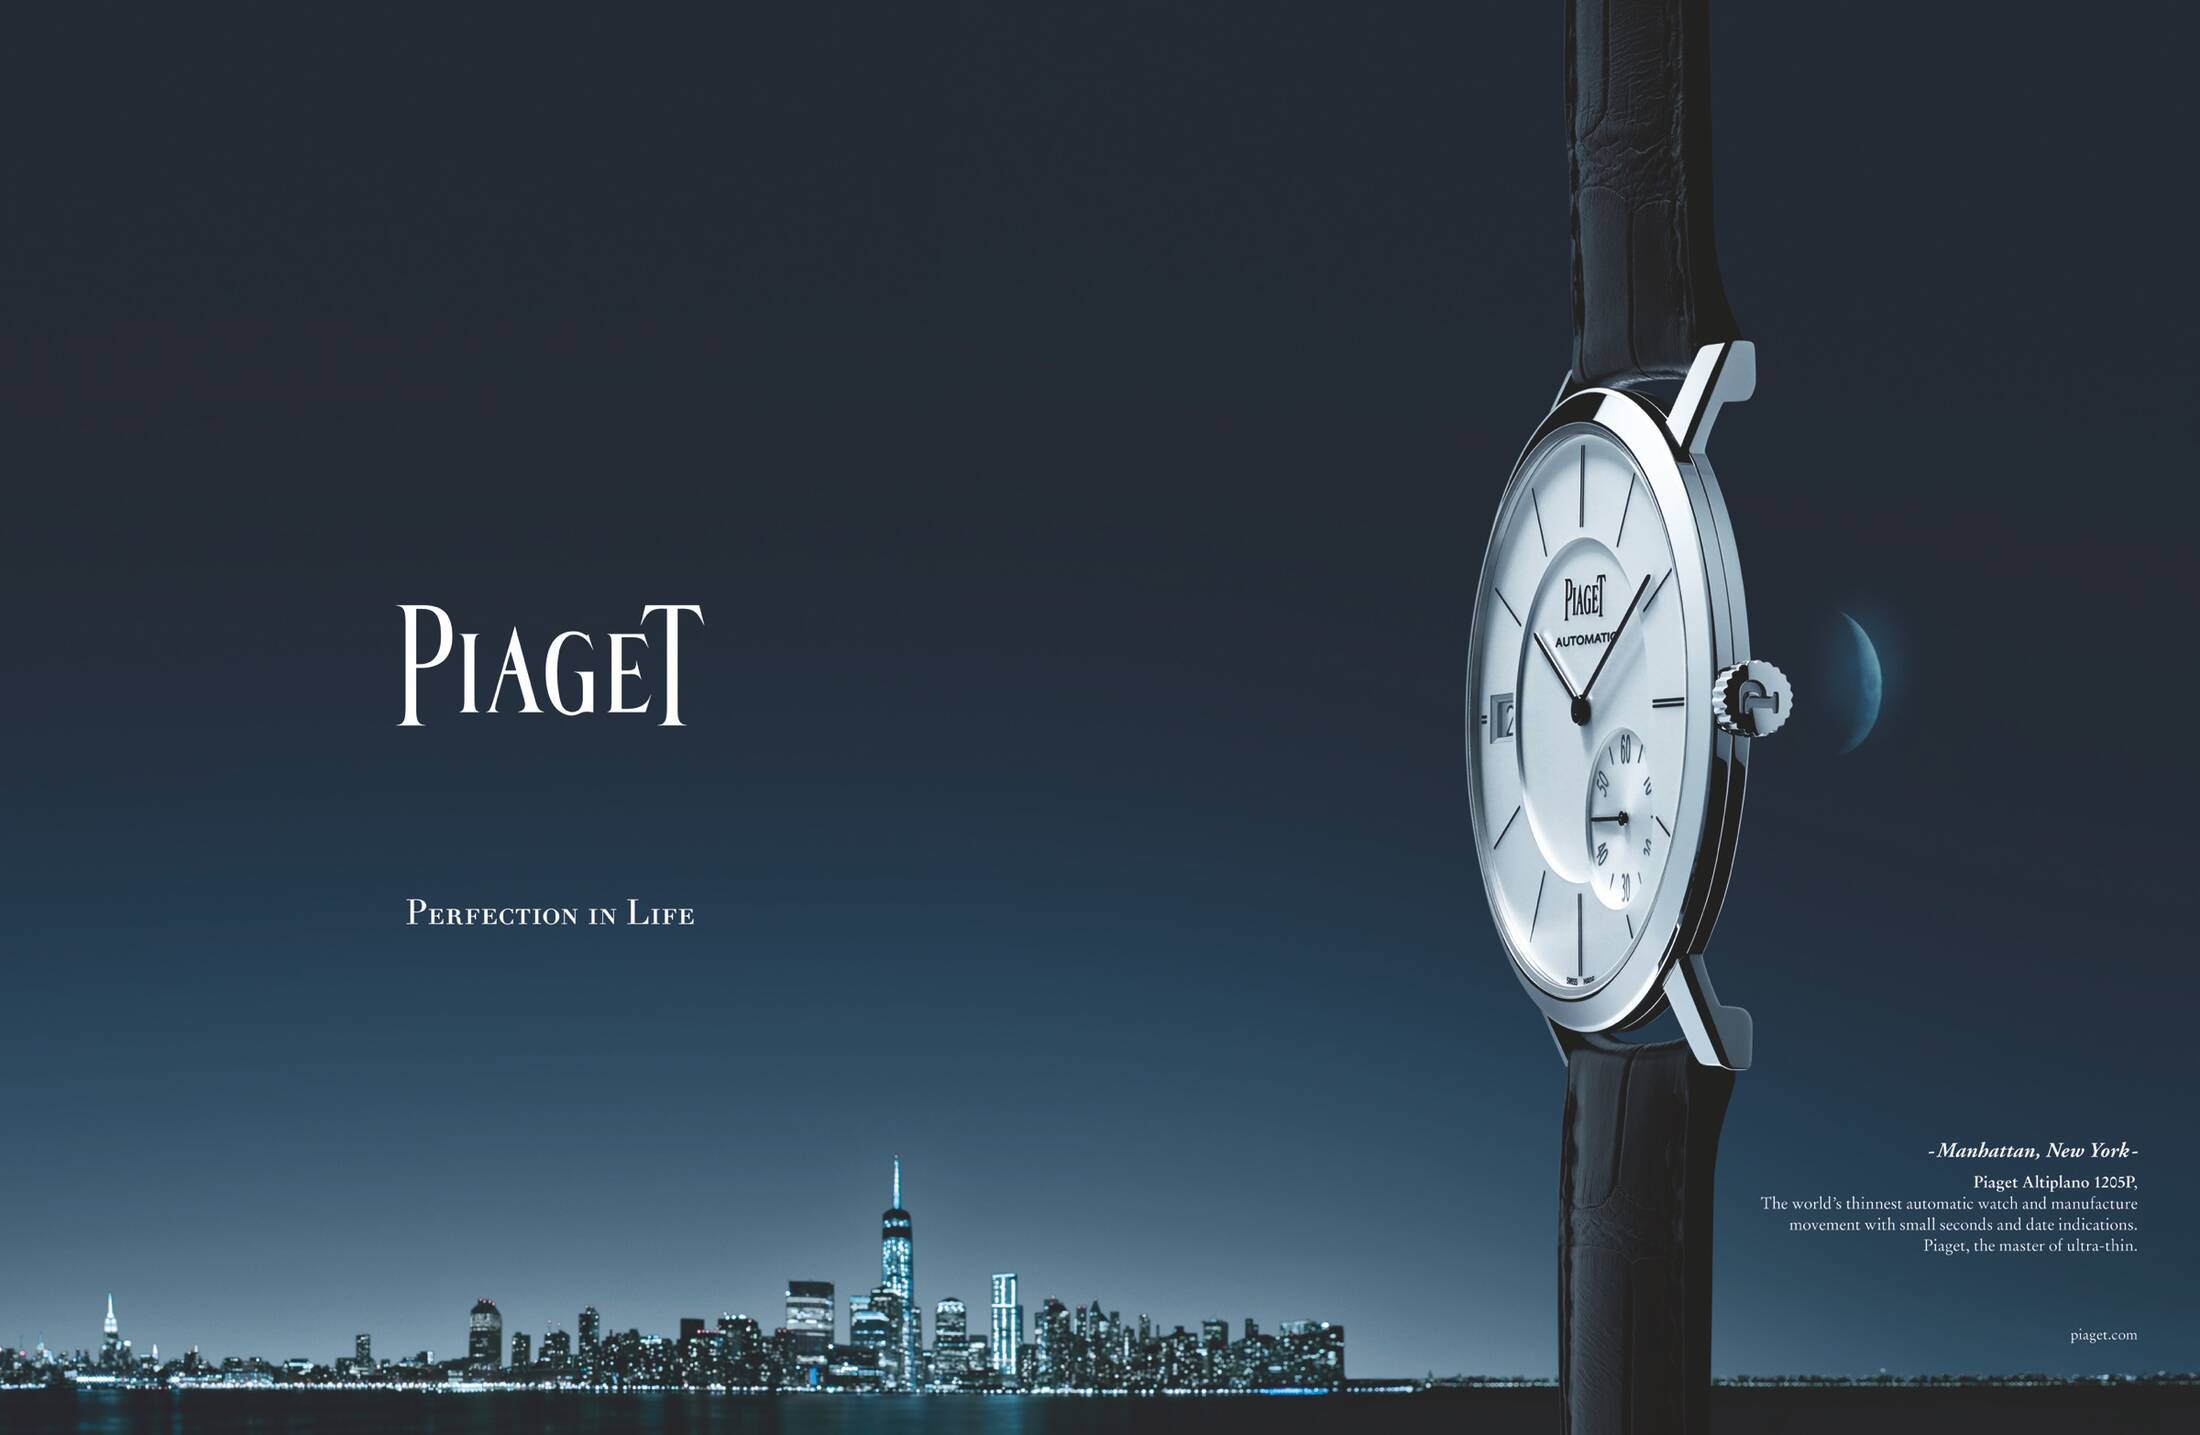 Perfection in Life – Piaget